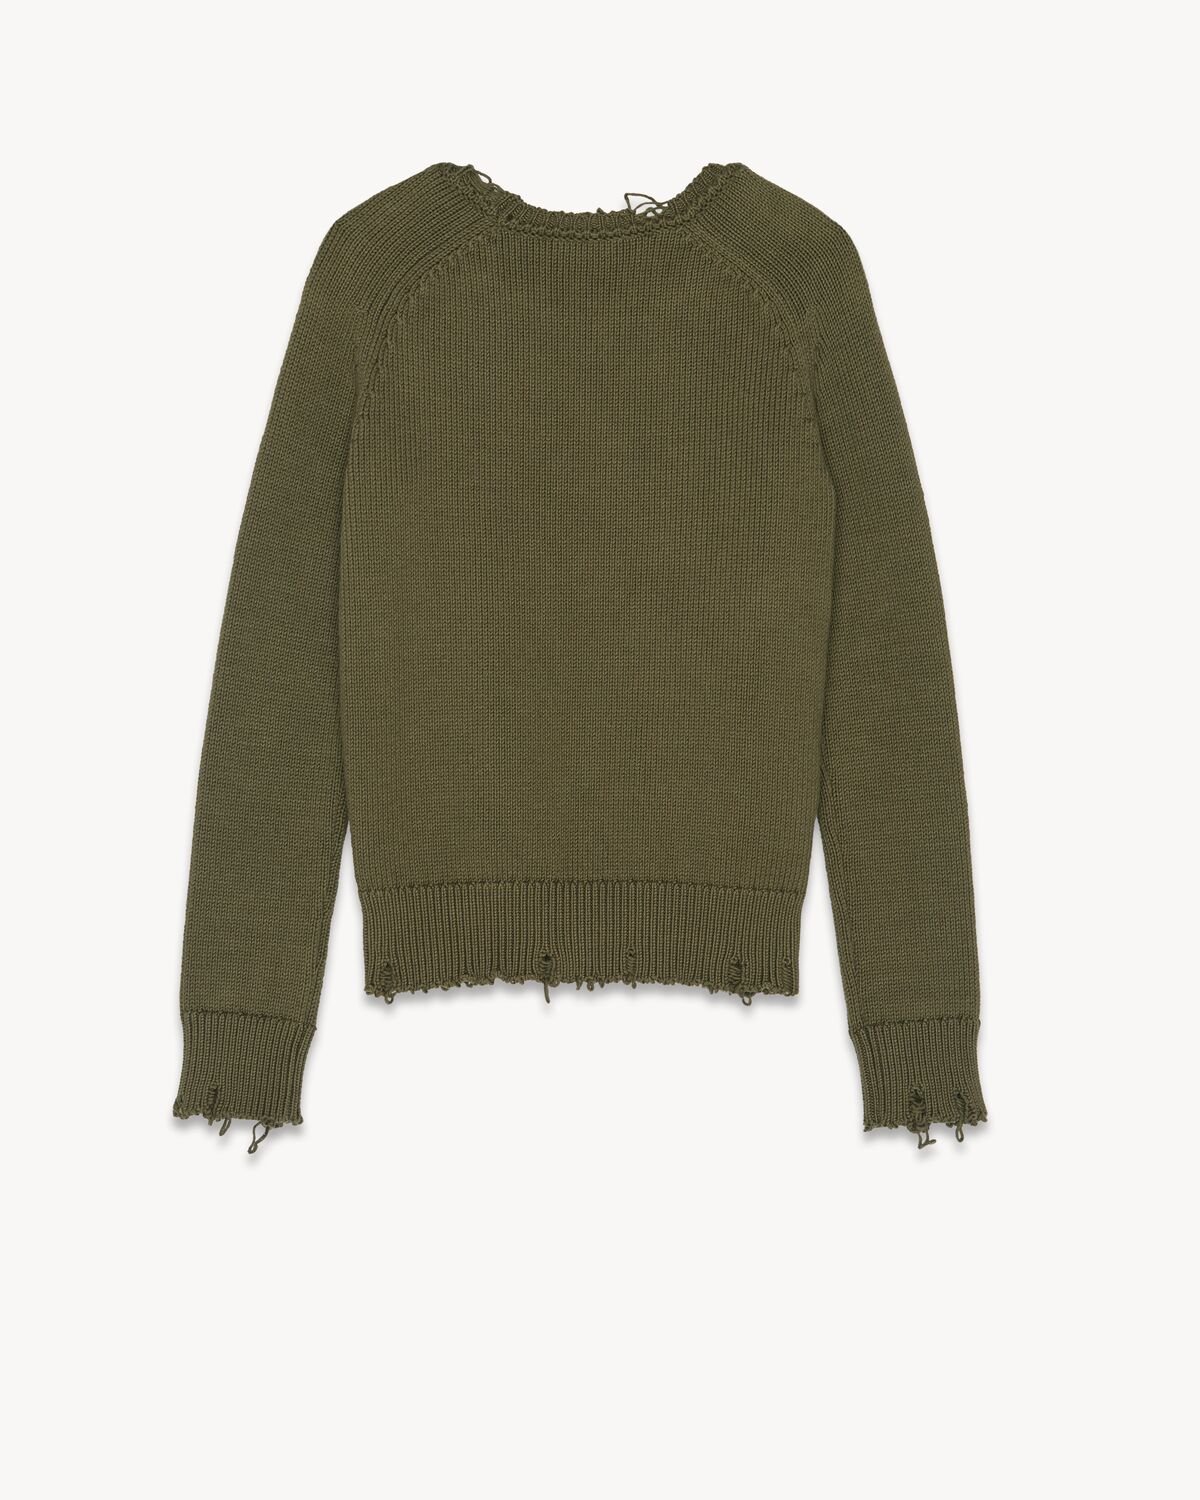 Destroyed knit sweater